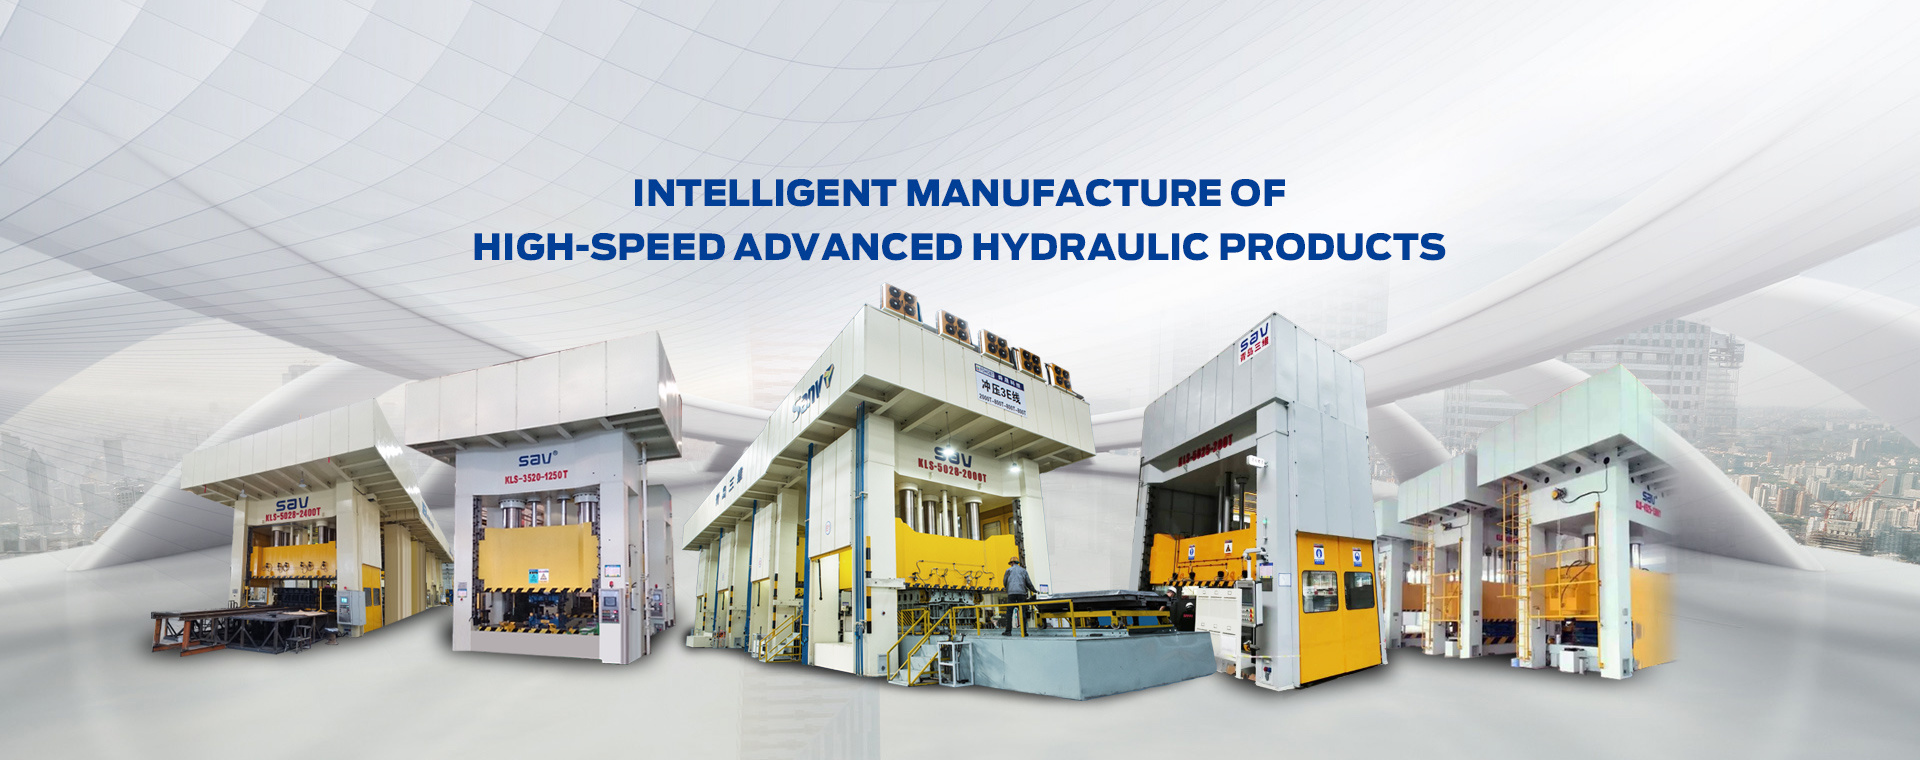 Intelligent manufacture of high-speed advanced hydraulic products